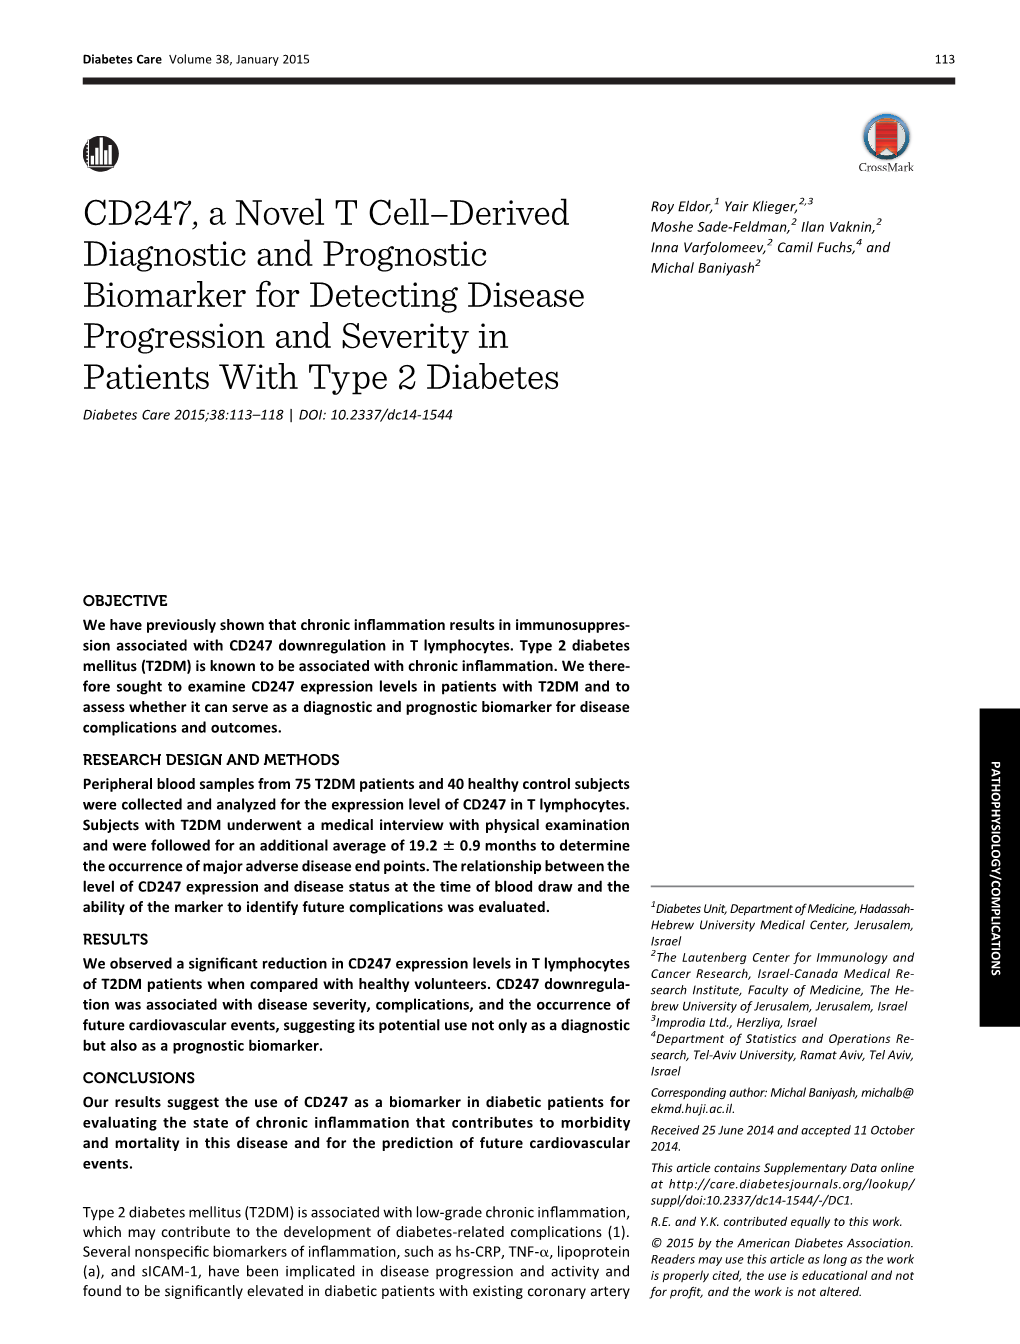 CD247, a Novel T Cell–Derived Diagnostic And